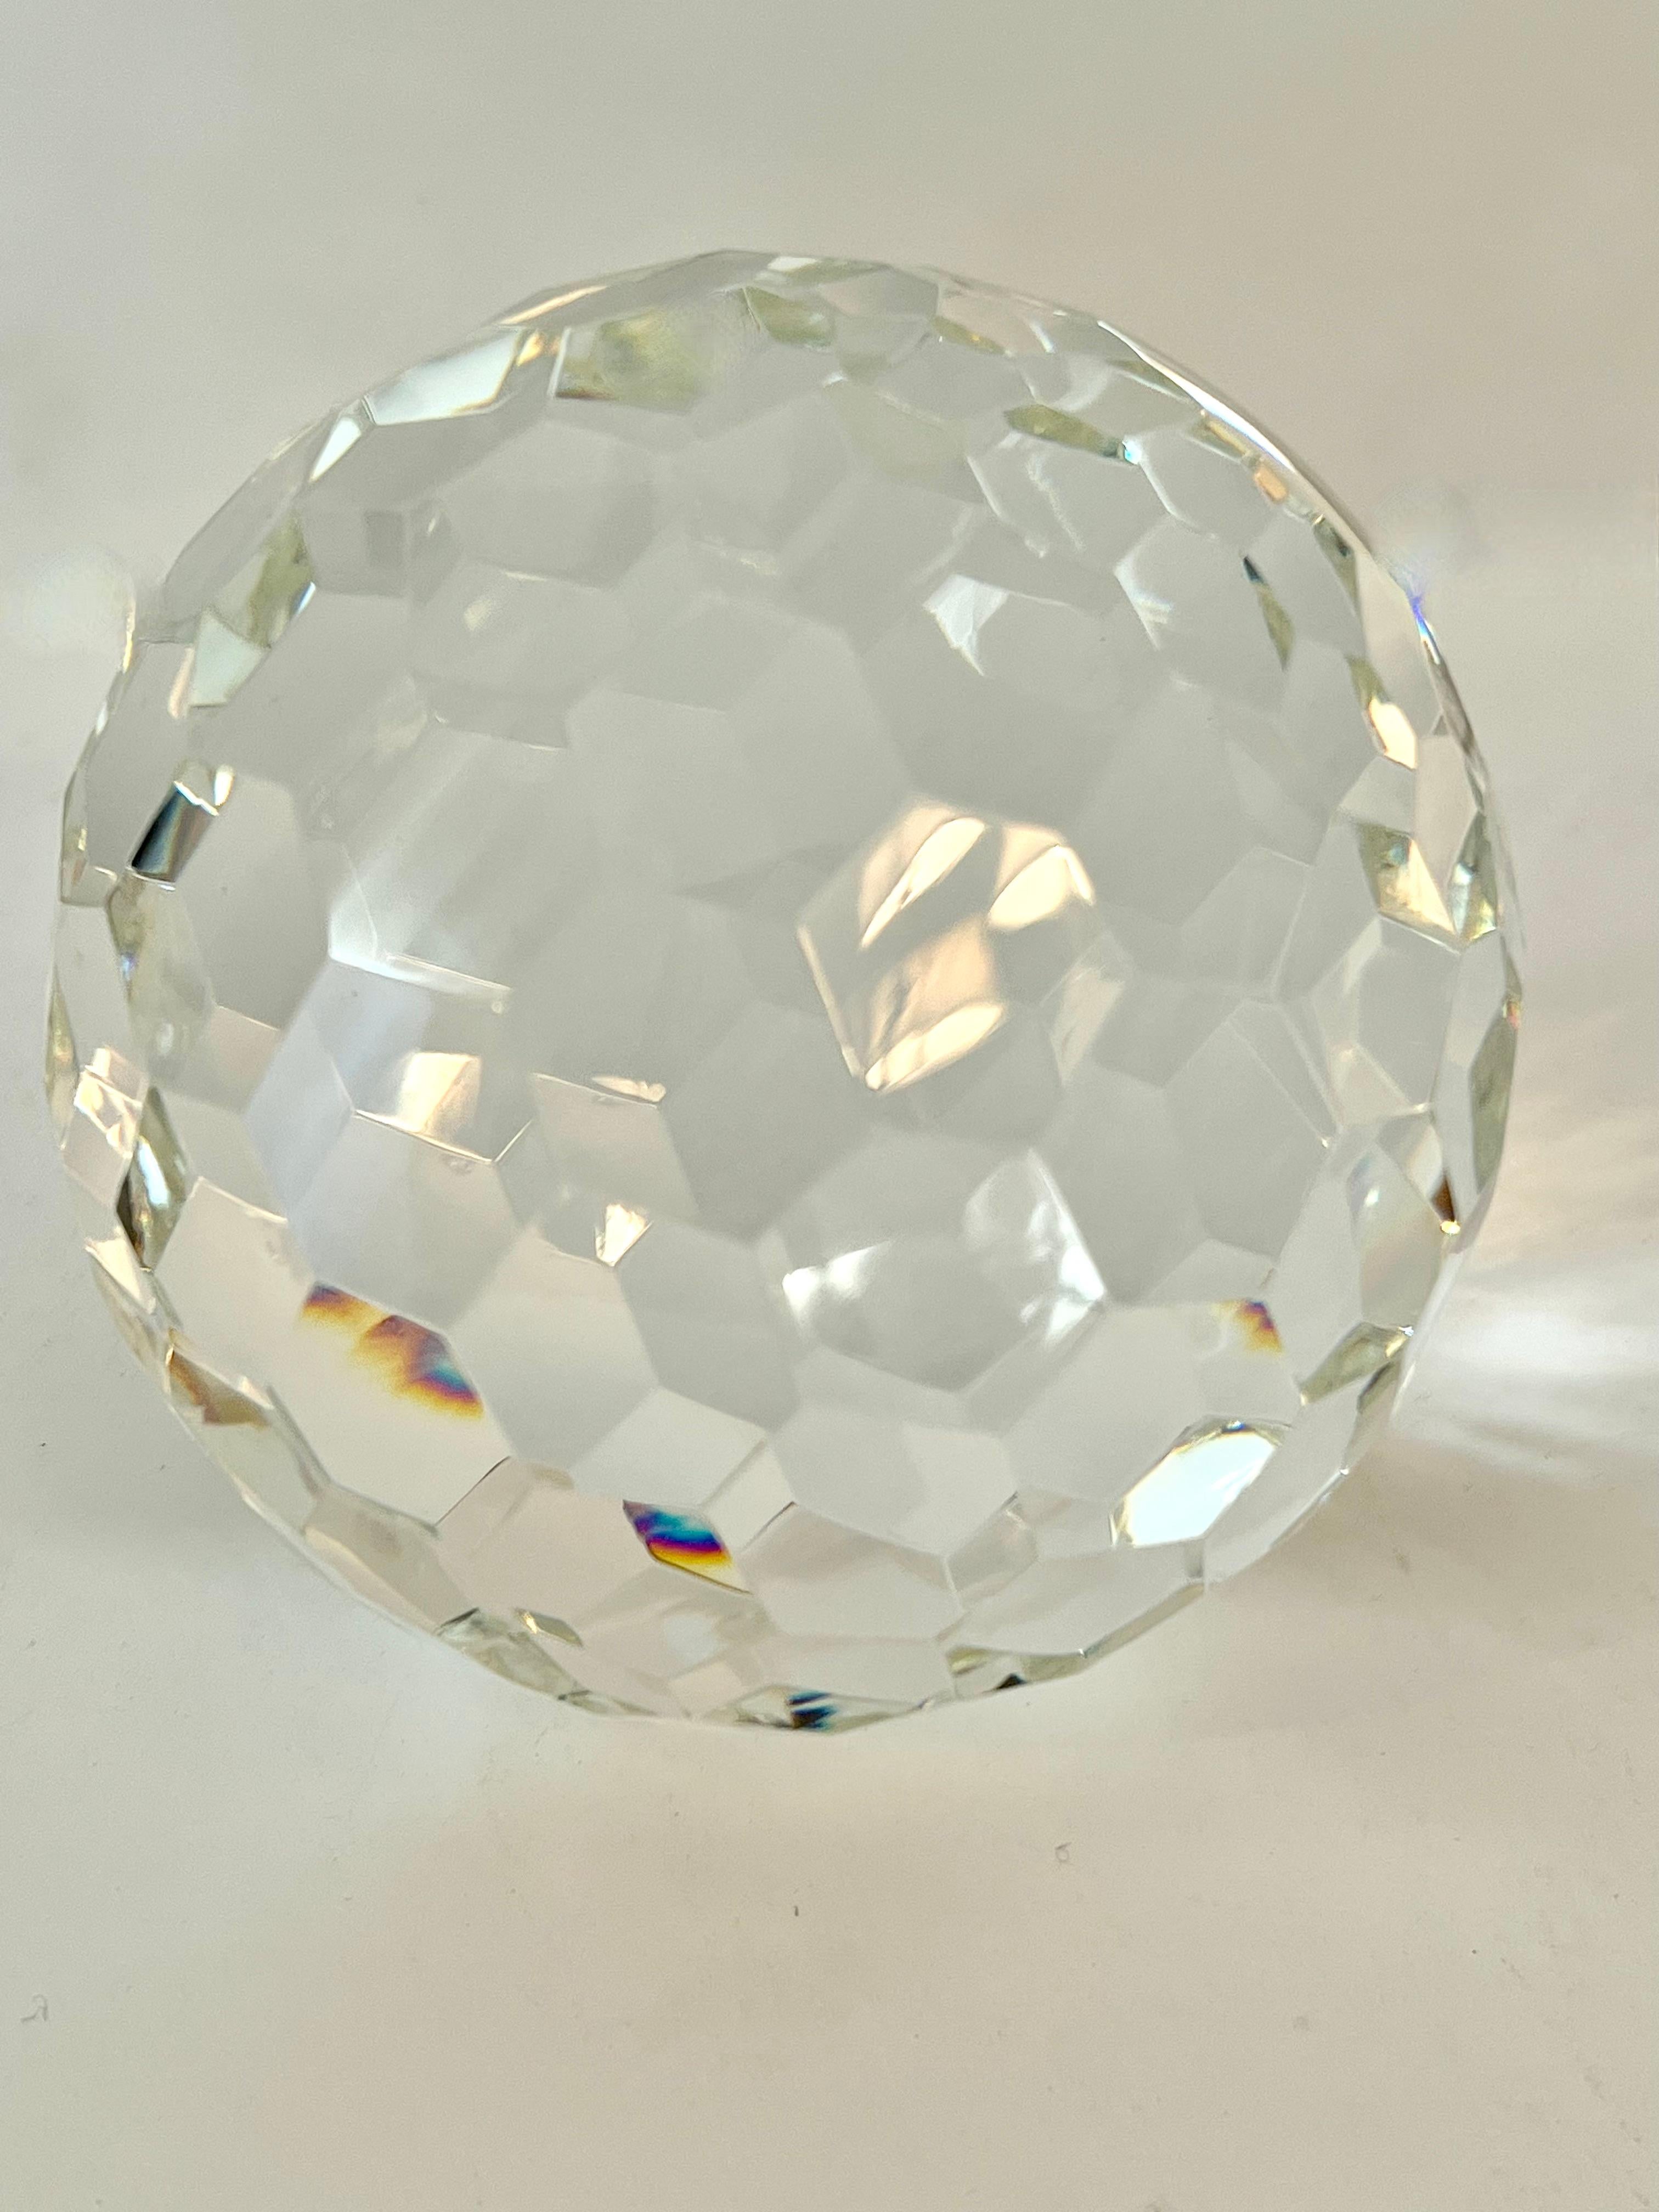 A large and weighty crystal ball - cut crystal is brilliantly multi-faceted, 

The piece reflects light from every angle - also works well as a bookend or sit alone sculpture.  Due to it's similarity to a golf ball this would be a great addition to